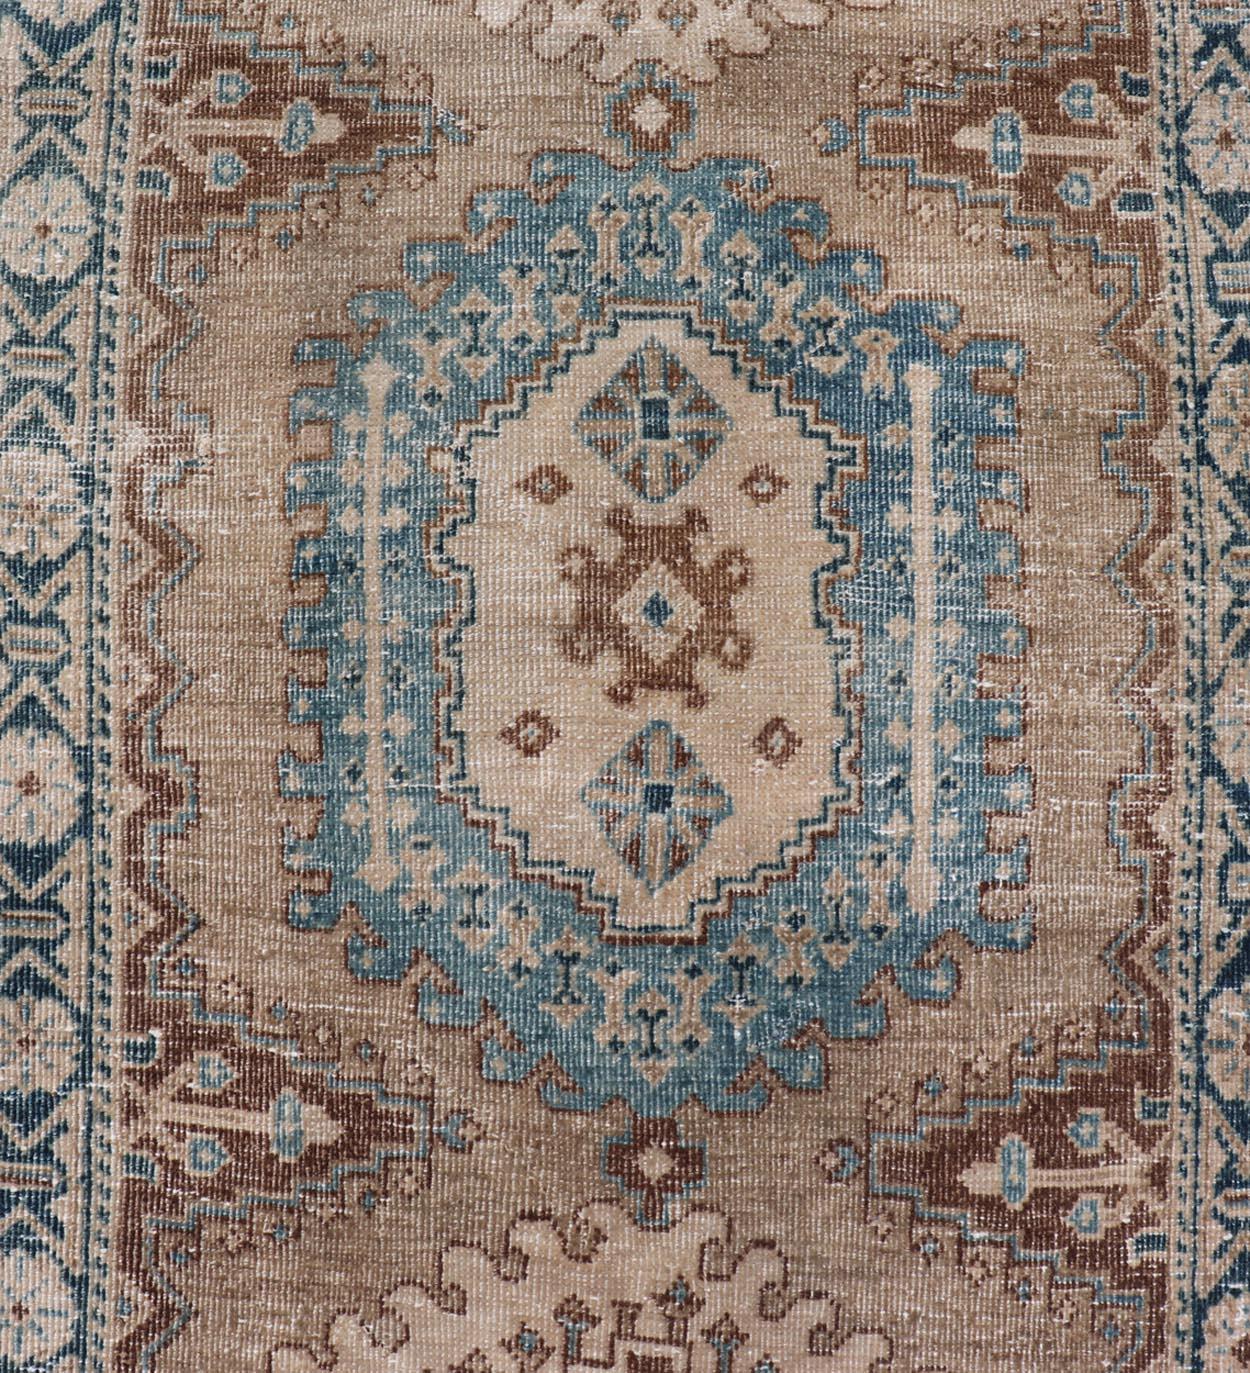 This antique Persian Heriz runner features a Sub-geometric medallion design rendered in blue, tan, brown and cream tones, set upon a tan background. A complementary, multi-tiered border encompasses the entirety of the piece; making it a marvelous